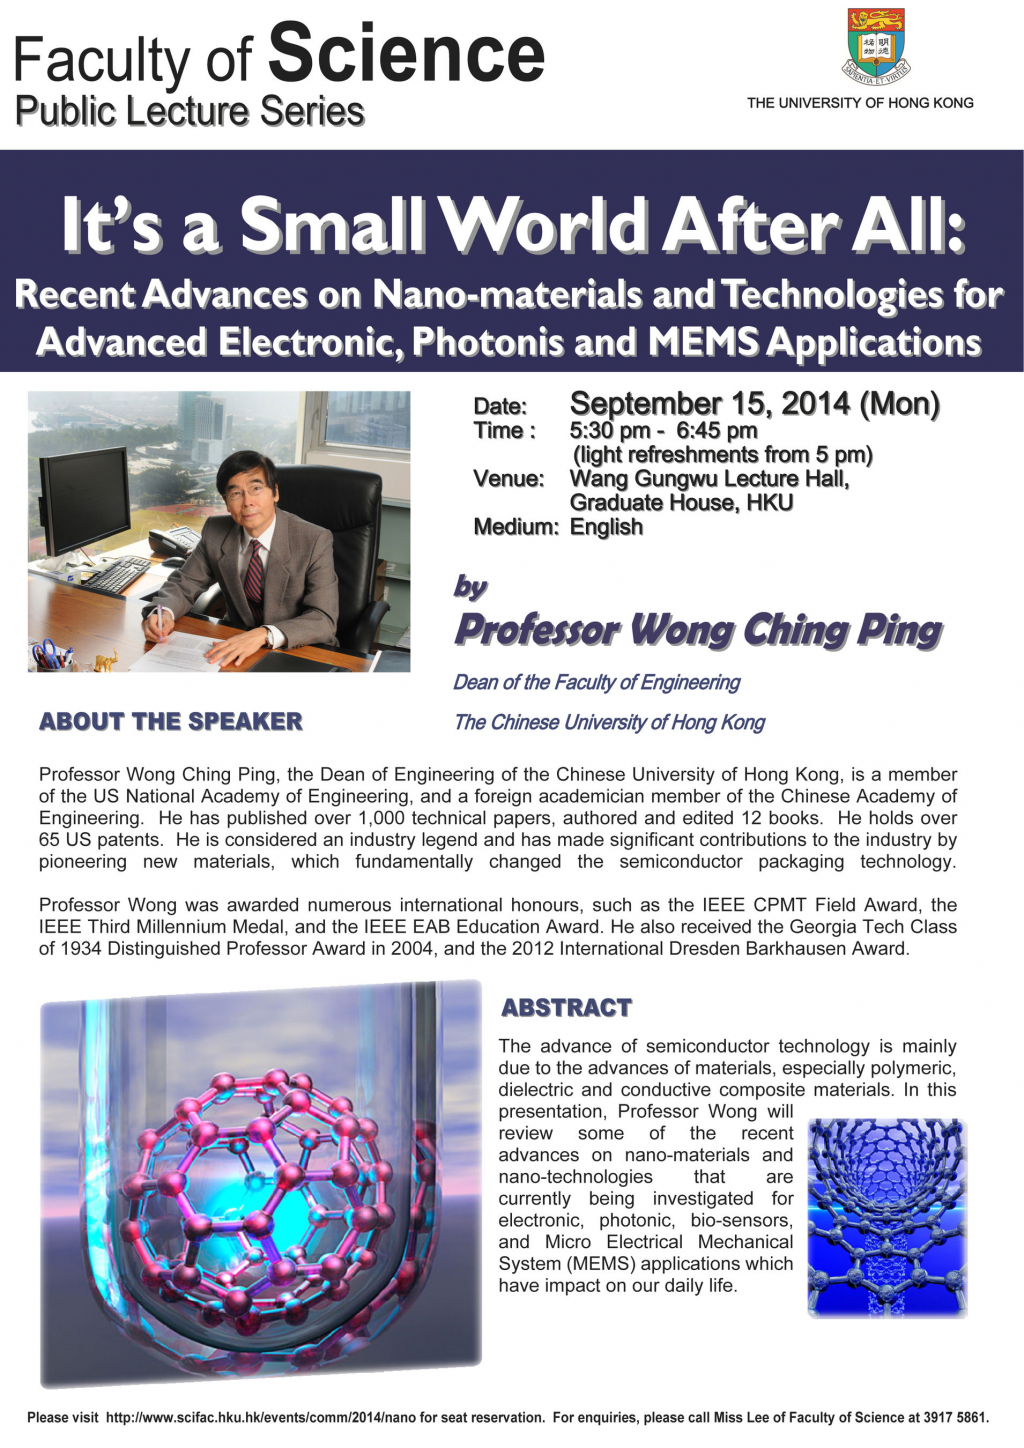 Public Lecture by Prof Wong Ching Ping